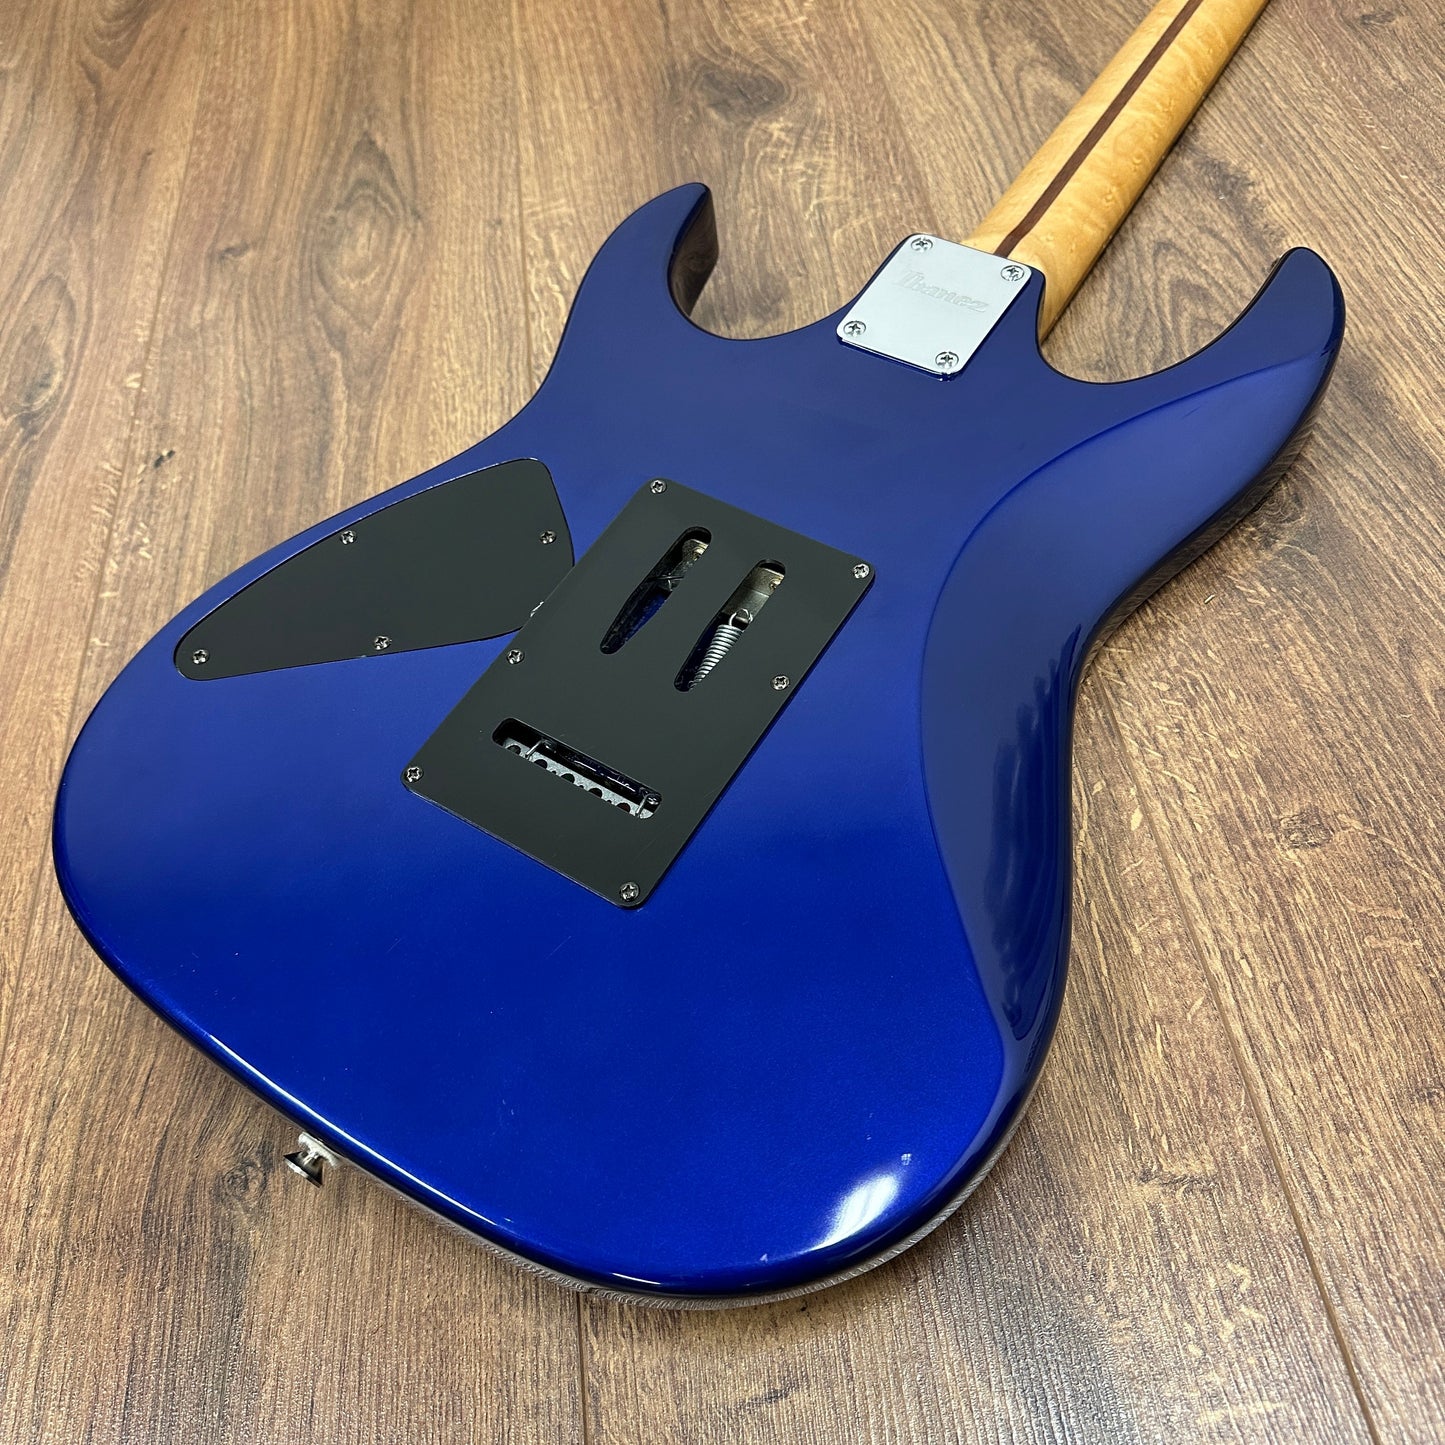 Pre-Owned Ibanez GIO GRX70 - Jewel Blue